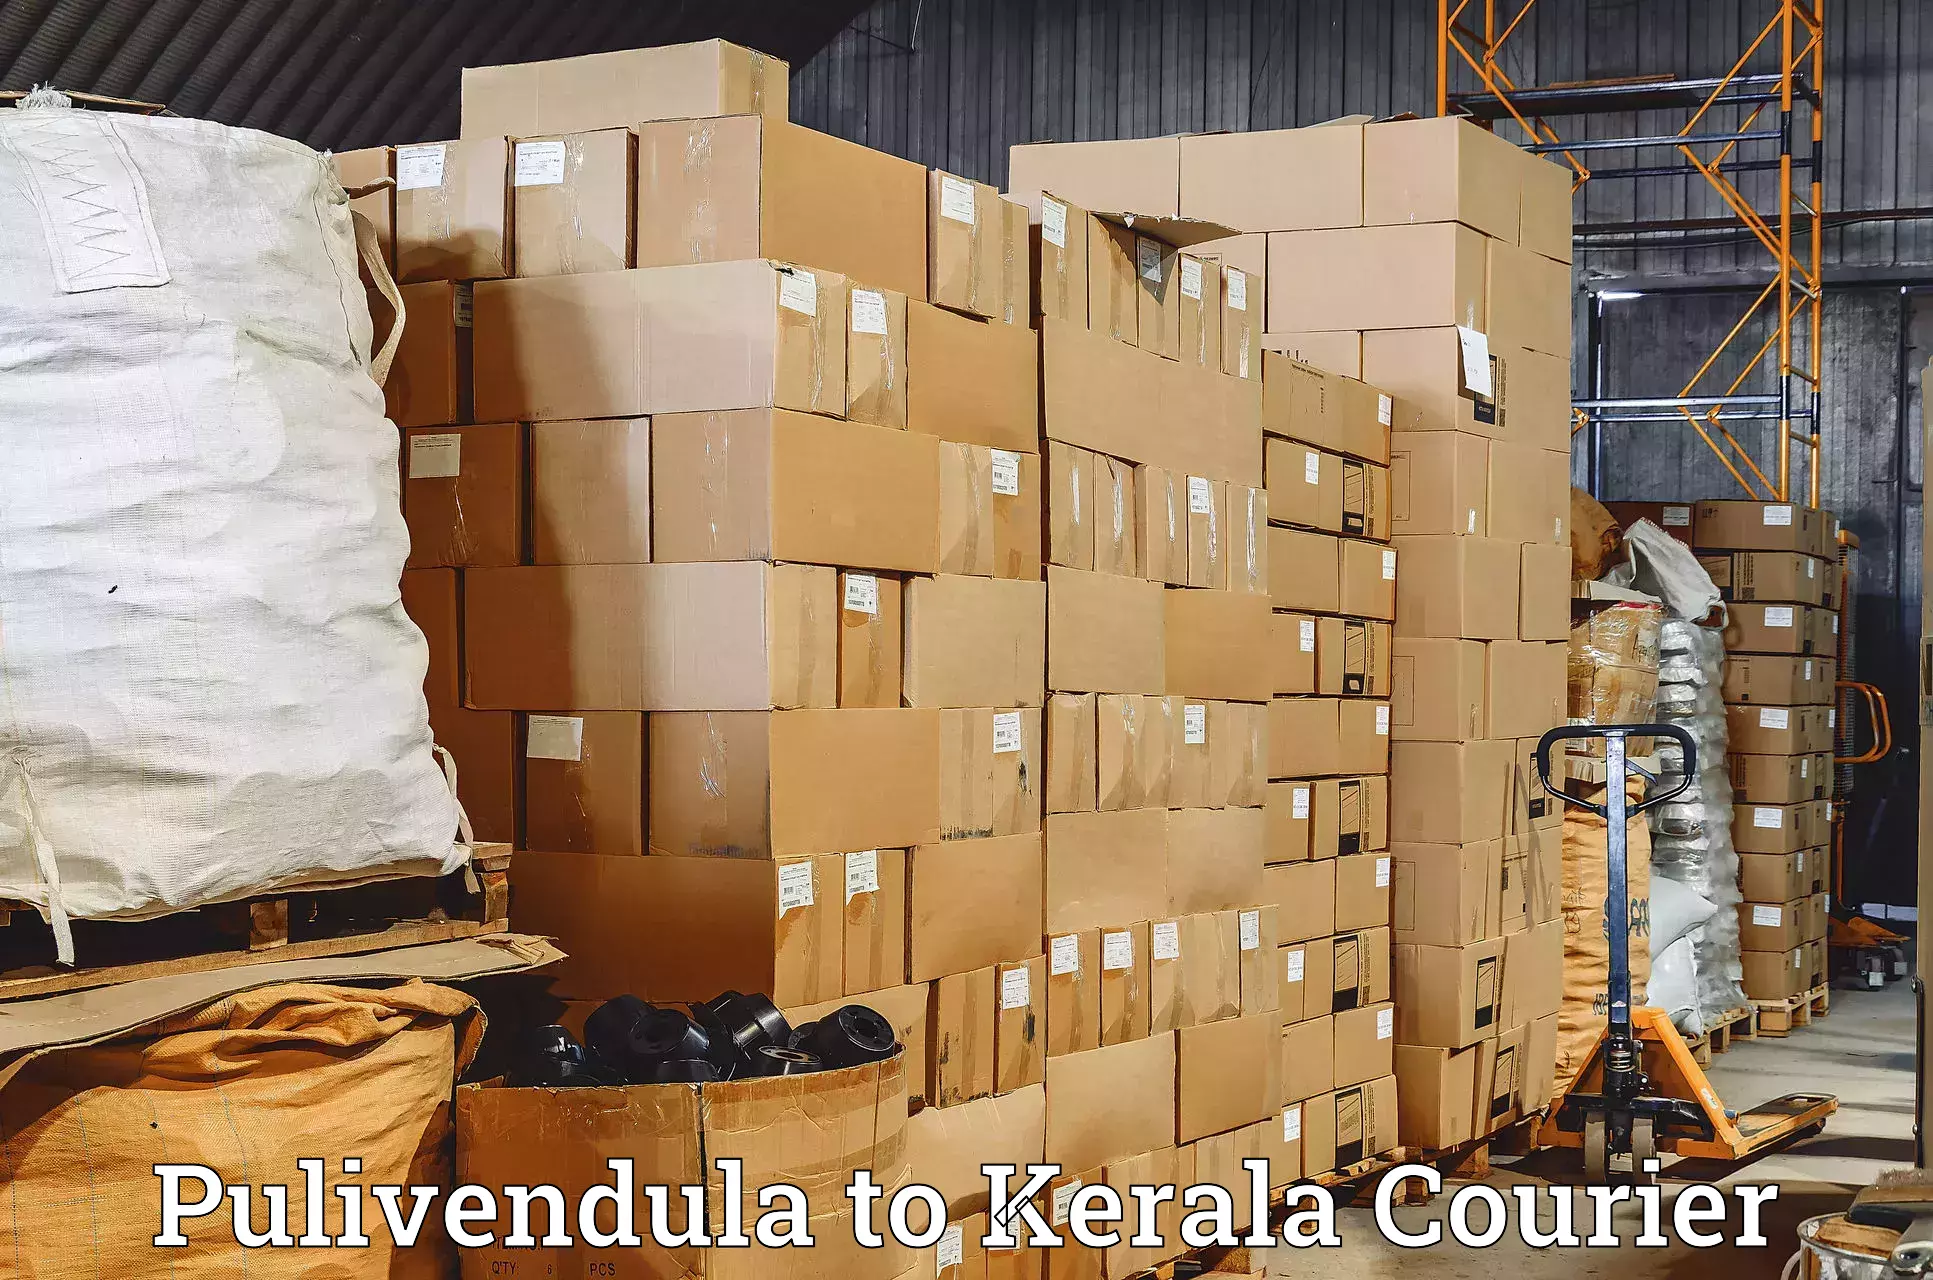 Package delivery network Pulivendula to Kerala